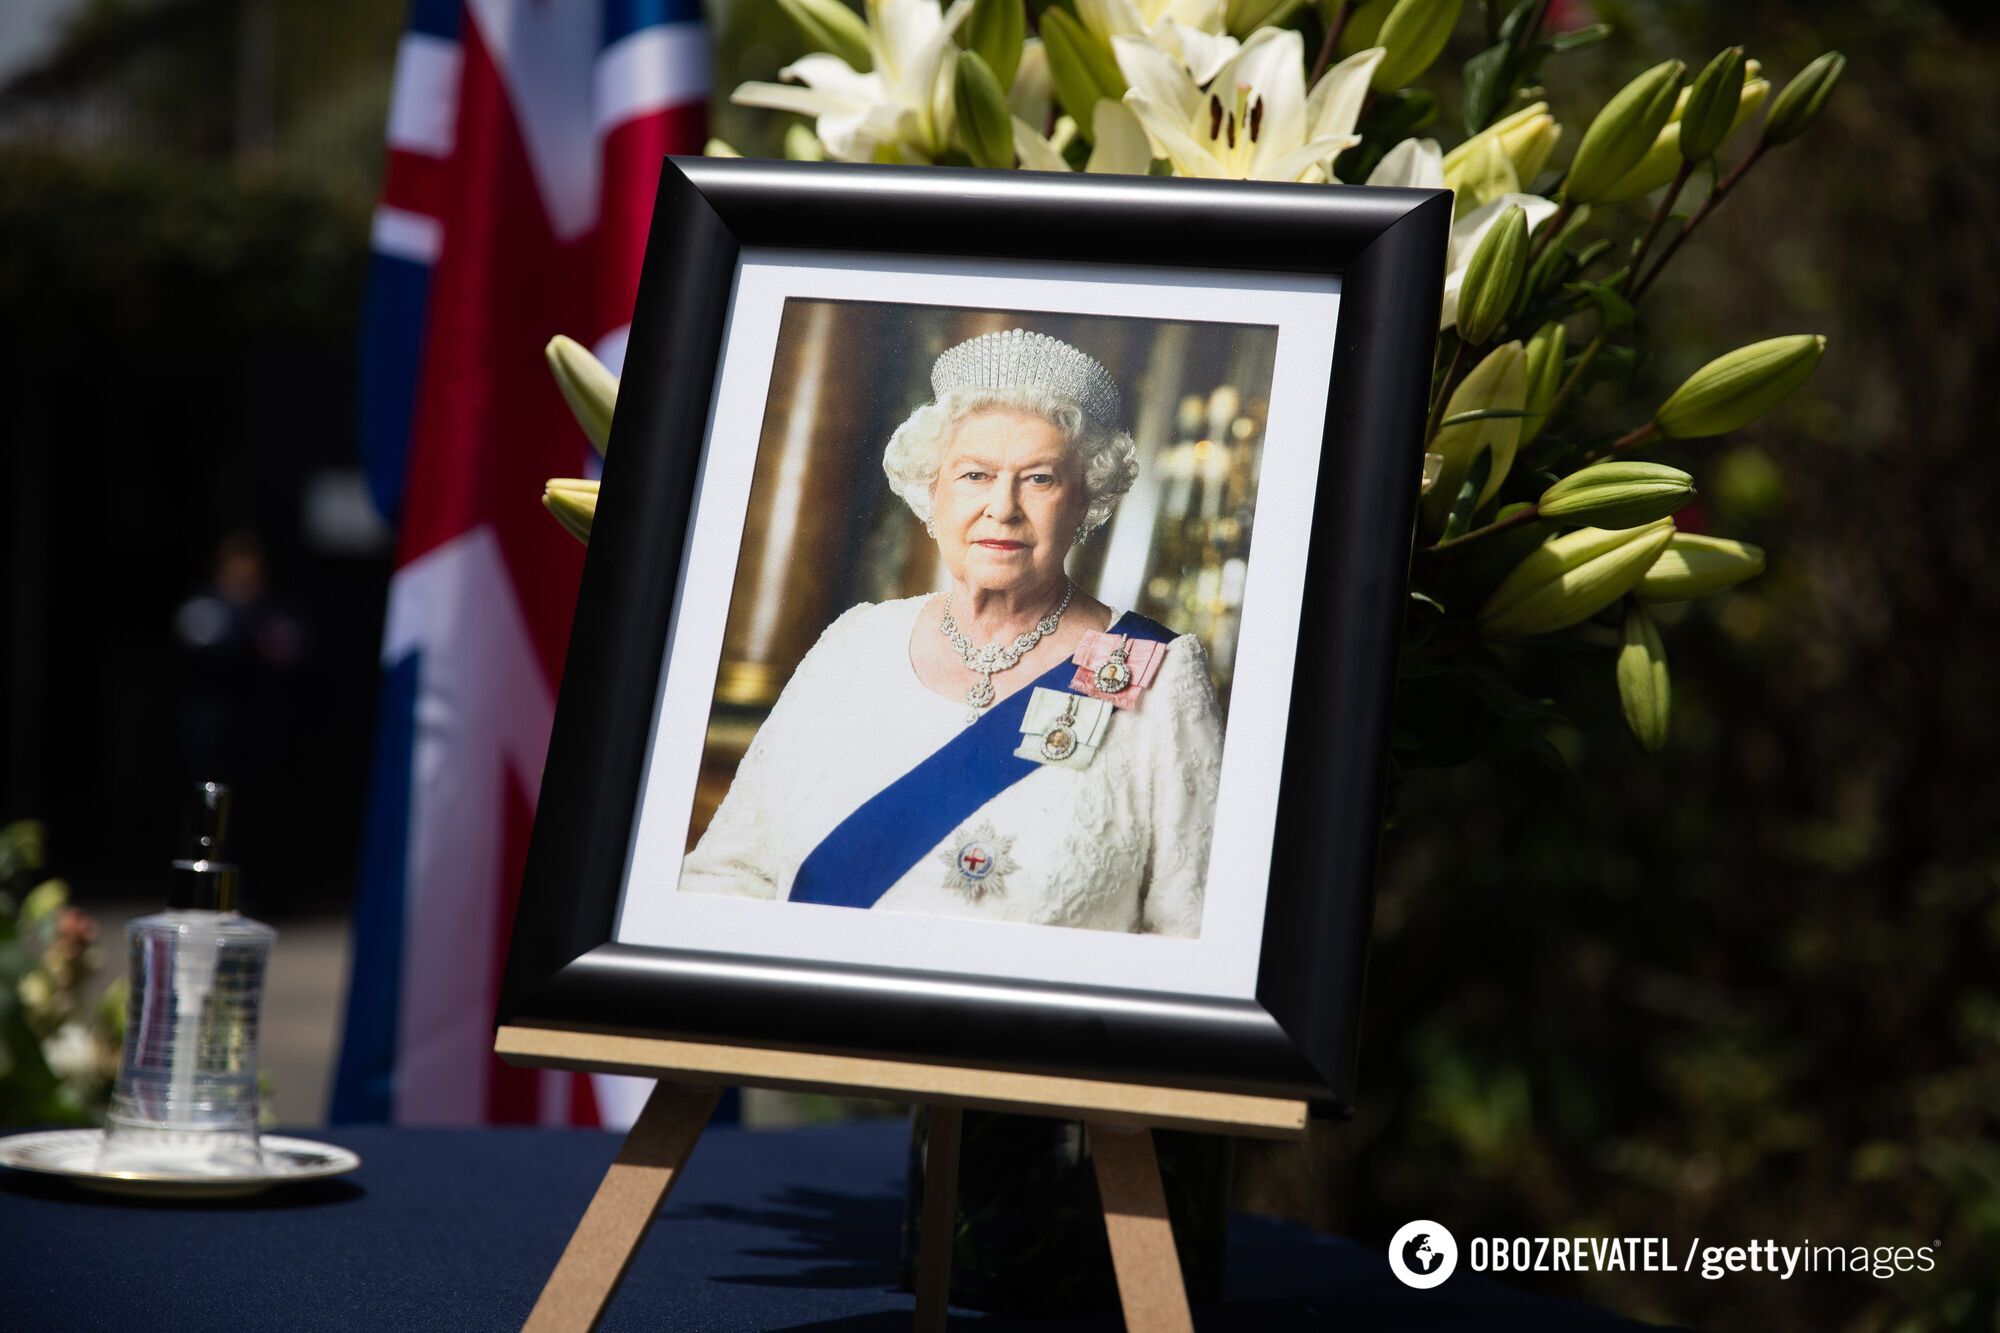 Elizabeth II could have died from bone marrow cancer she was hiding - royal biographer